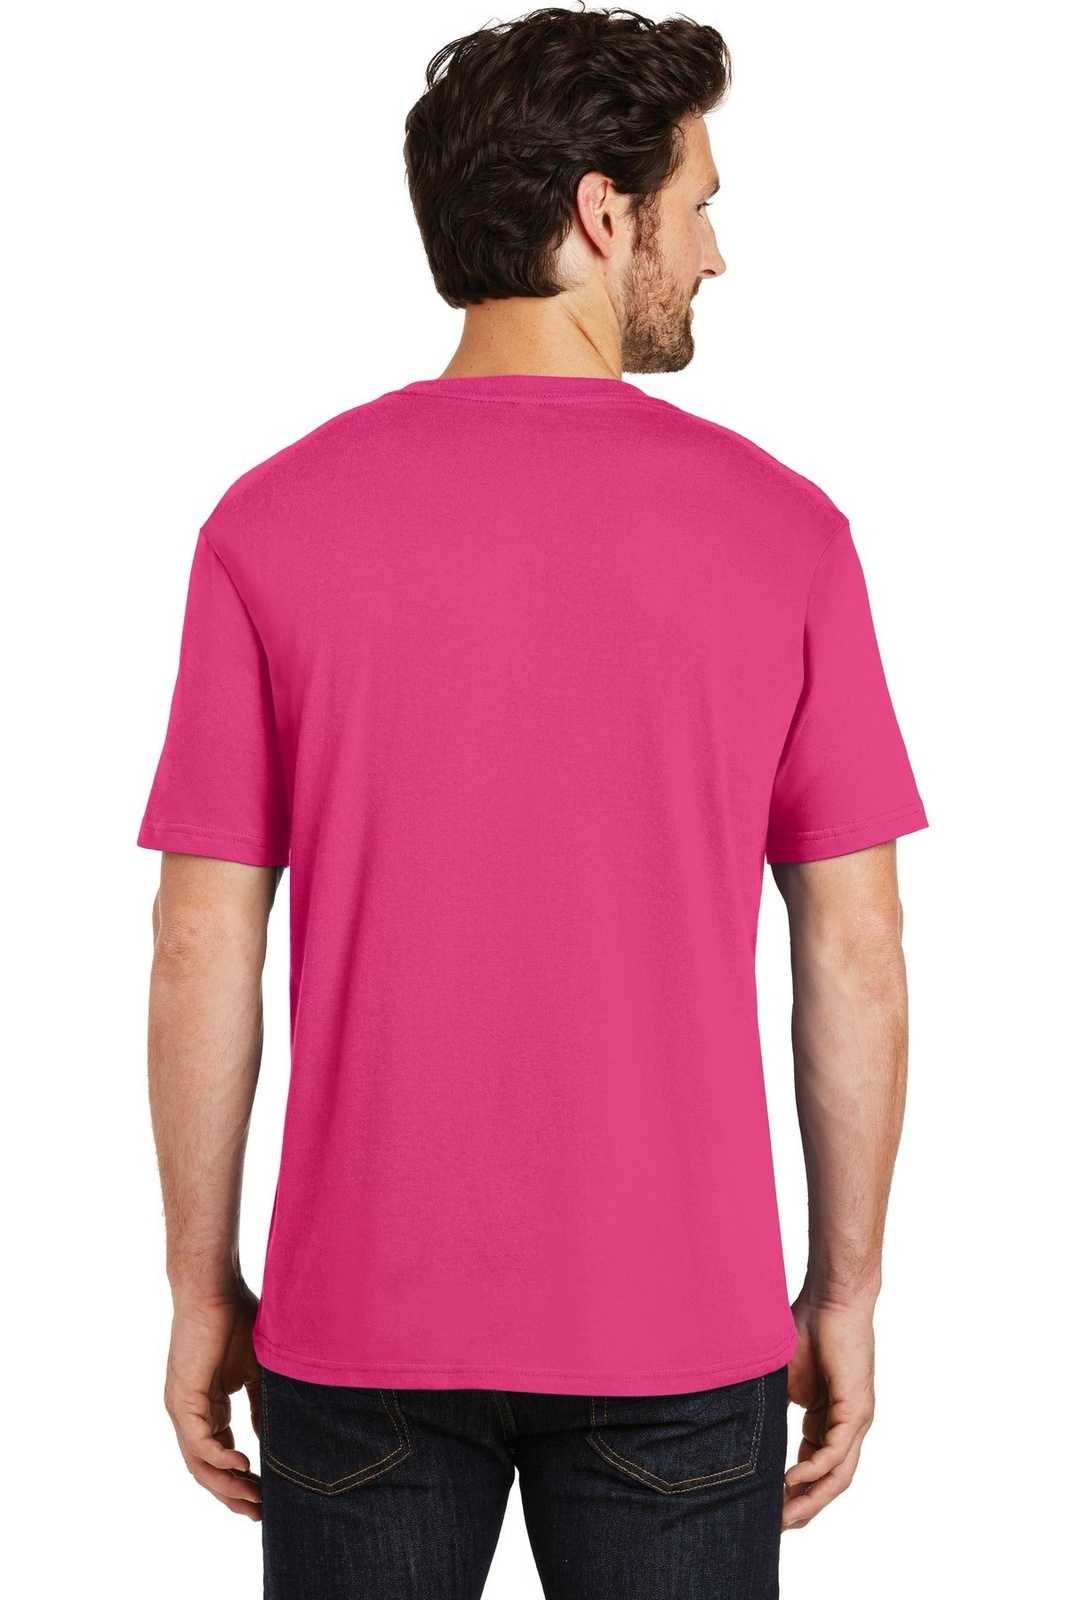 District DT104 Perfect Weight Tee - Dark Fuchsia - HIT a Double - 2